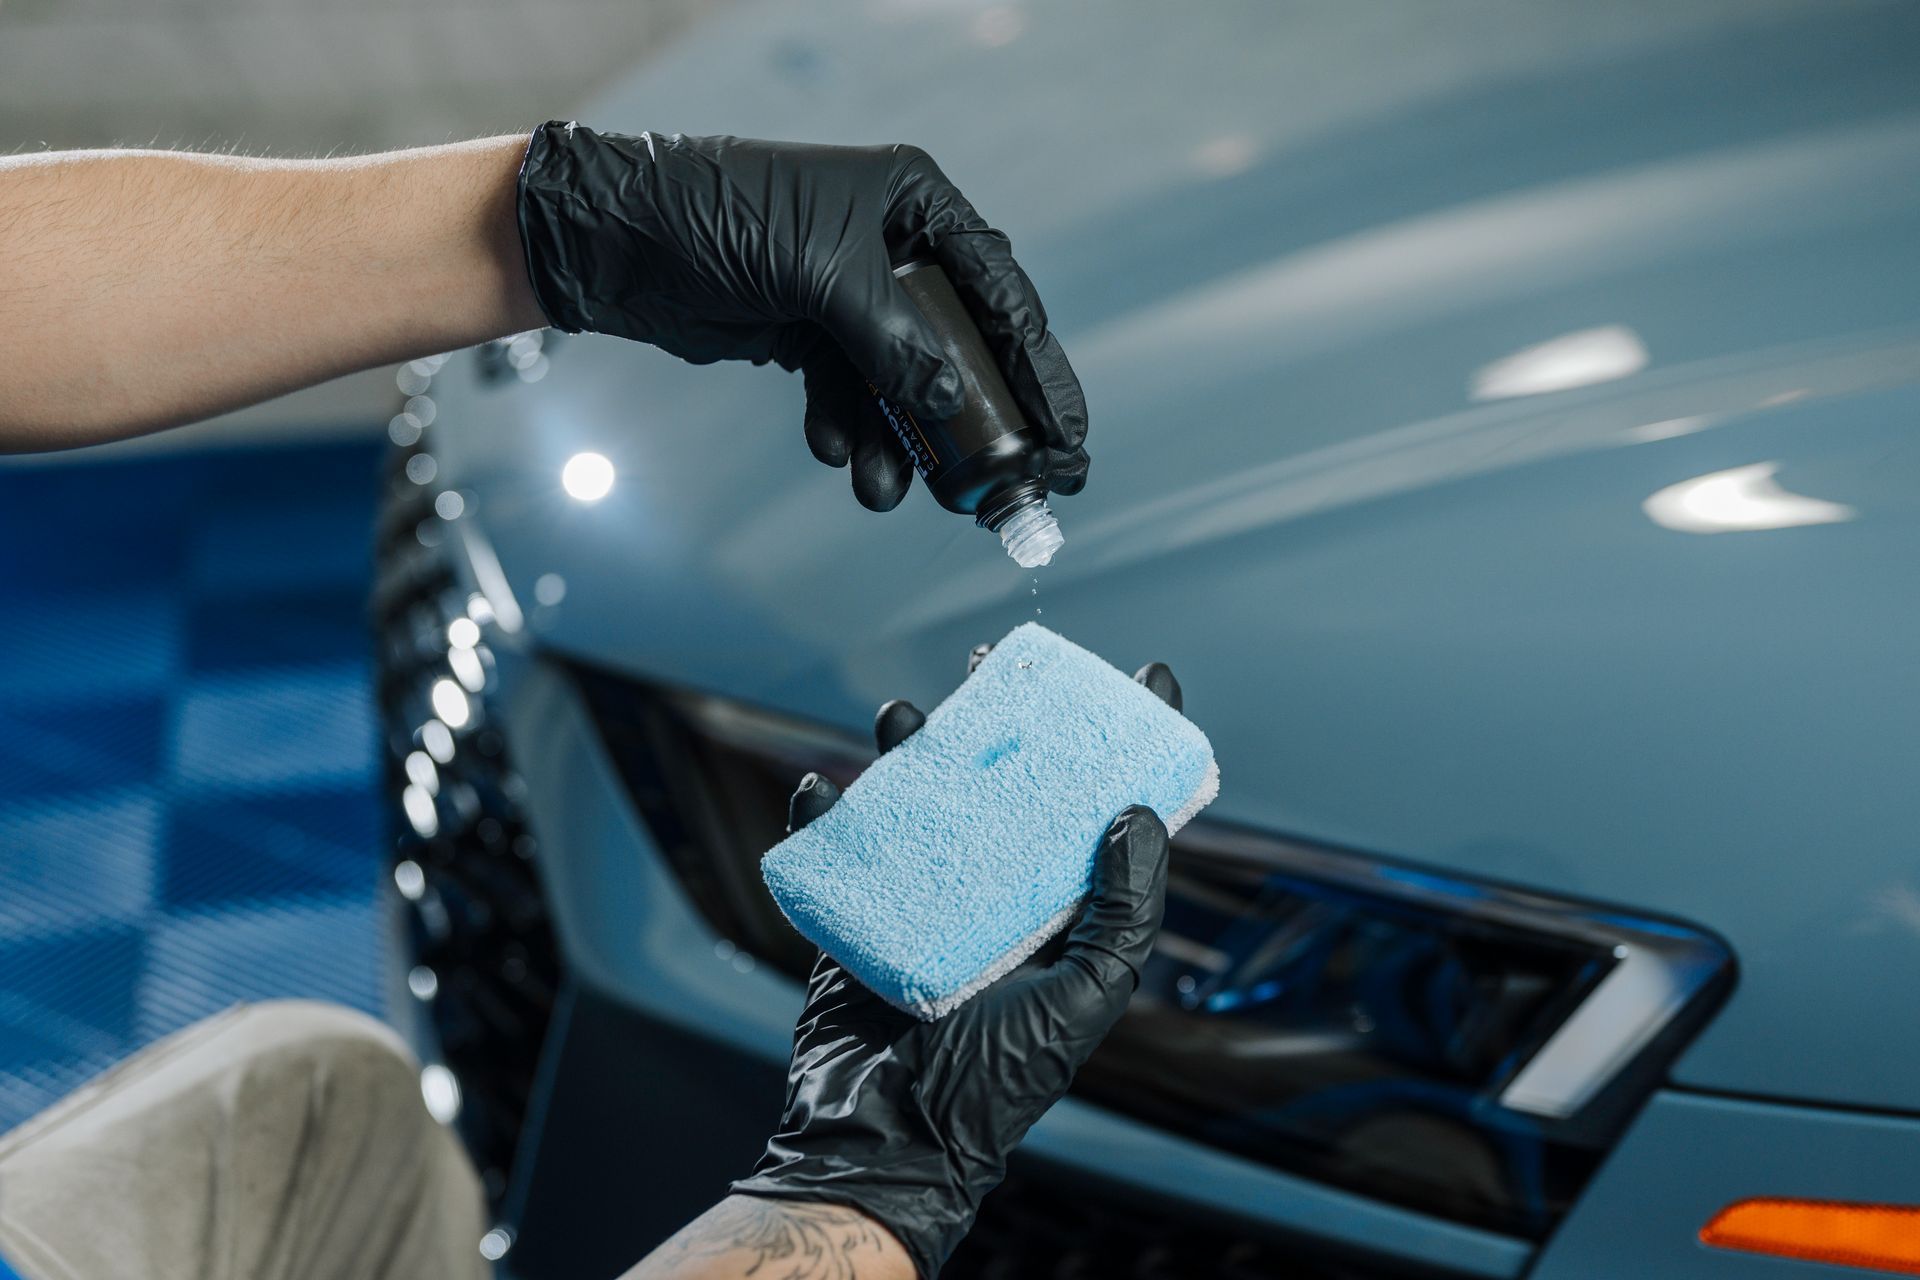 A person is cleaning a car with a sponge and a spray bottle.